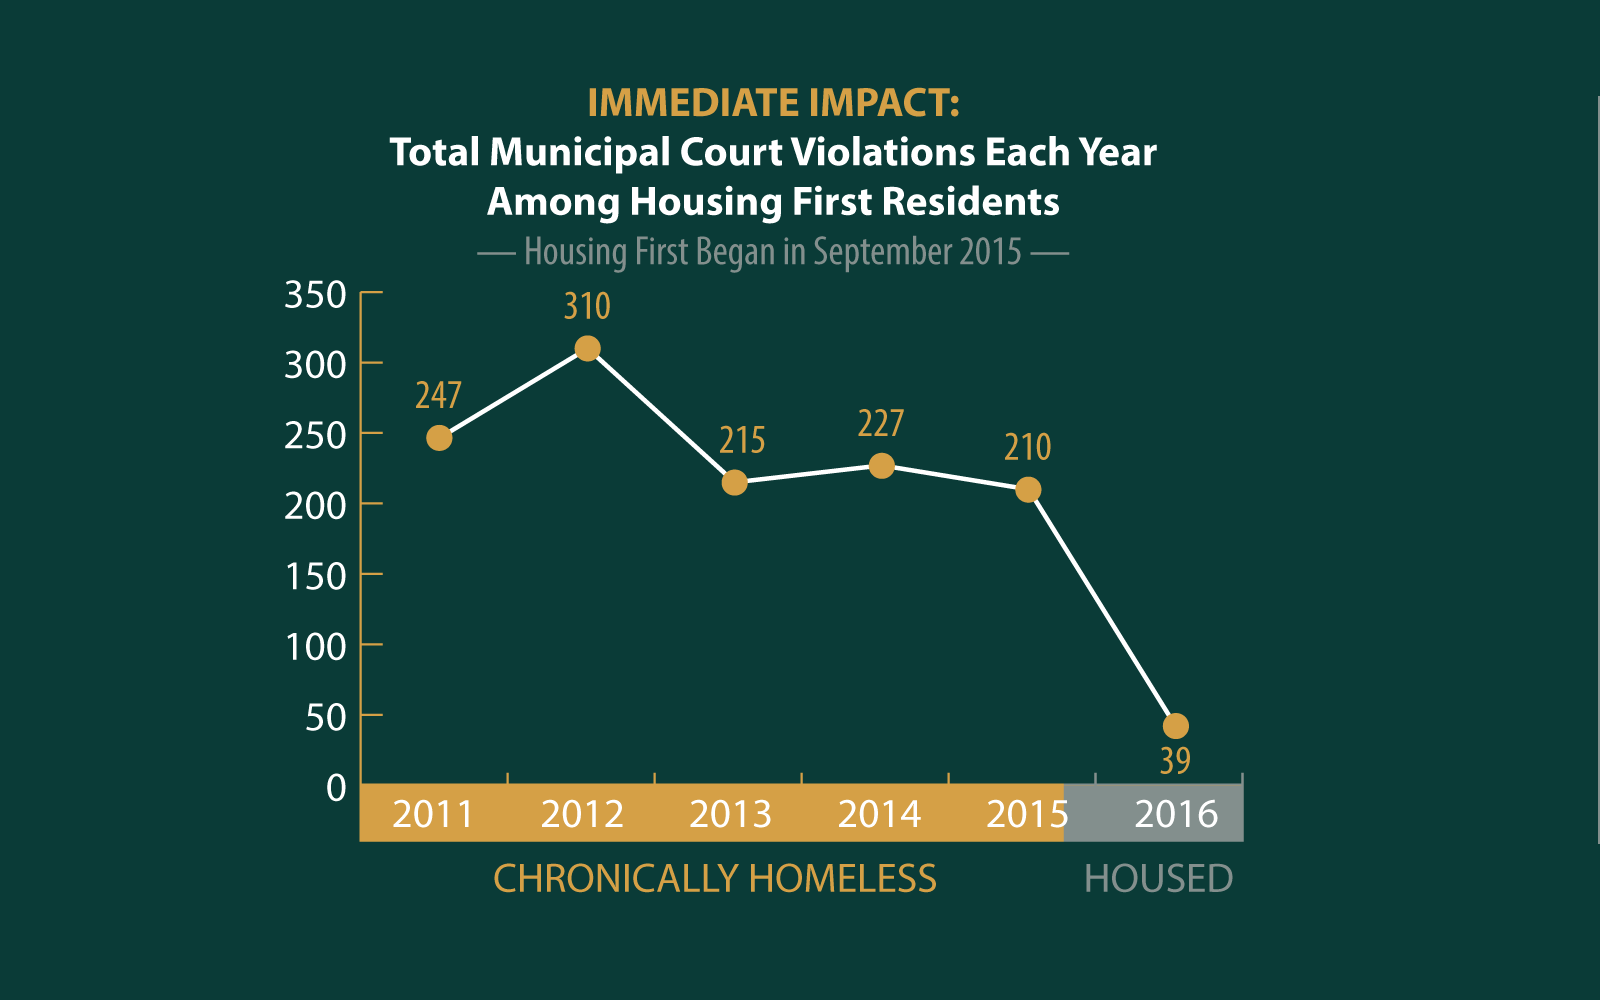 Total Municipal Court Violations Each Year Among Housing First Residents